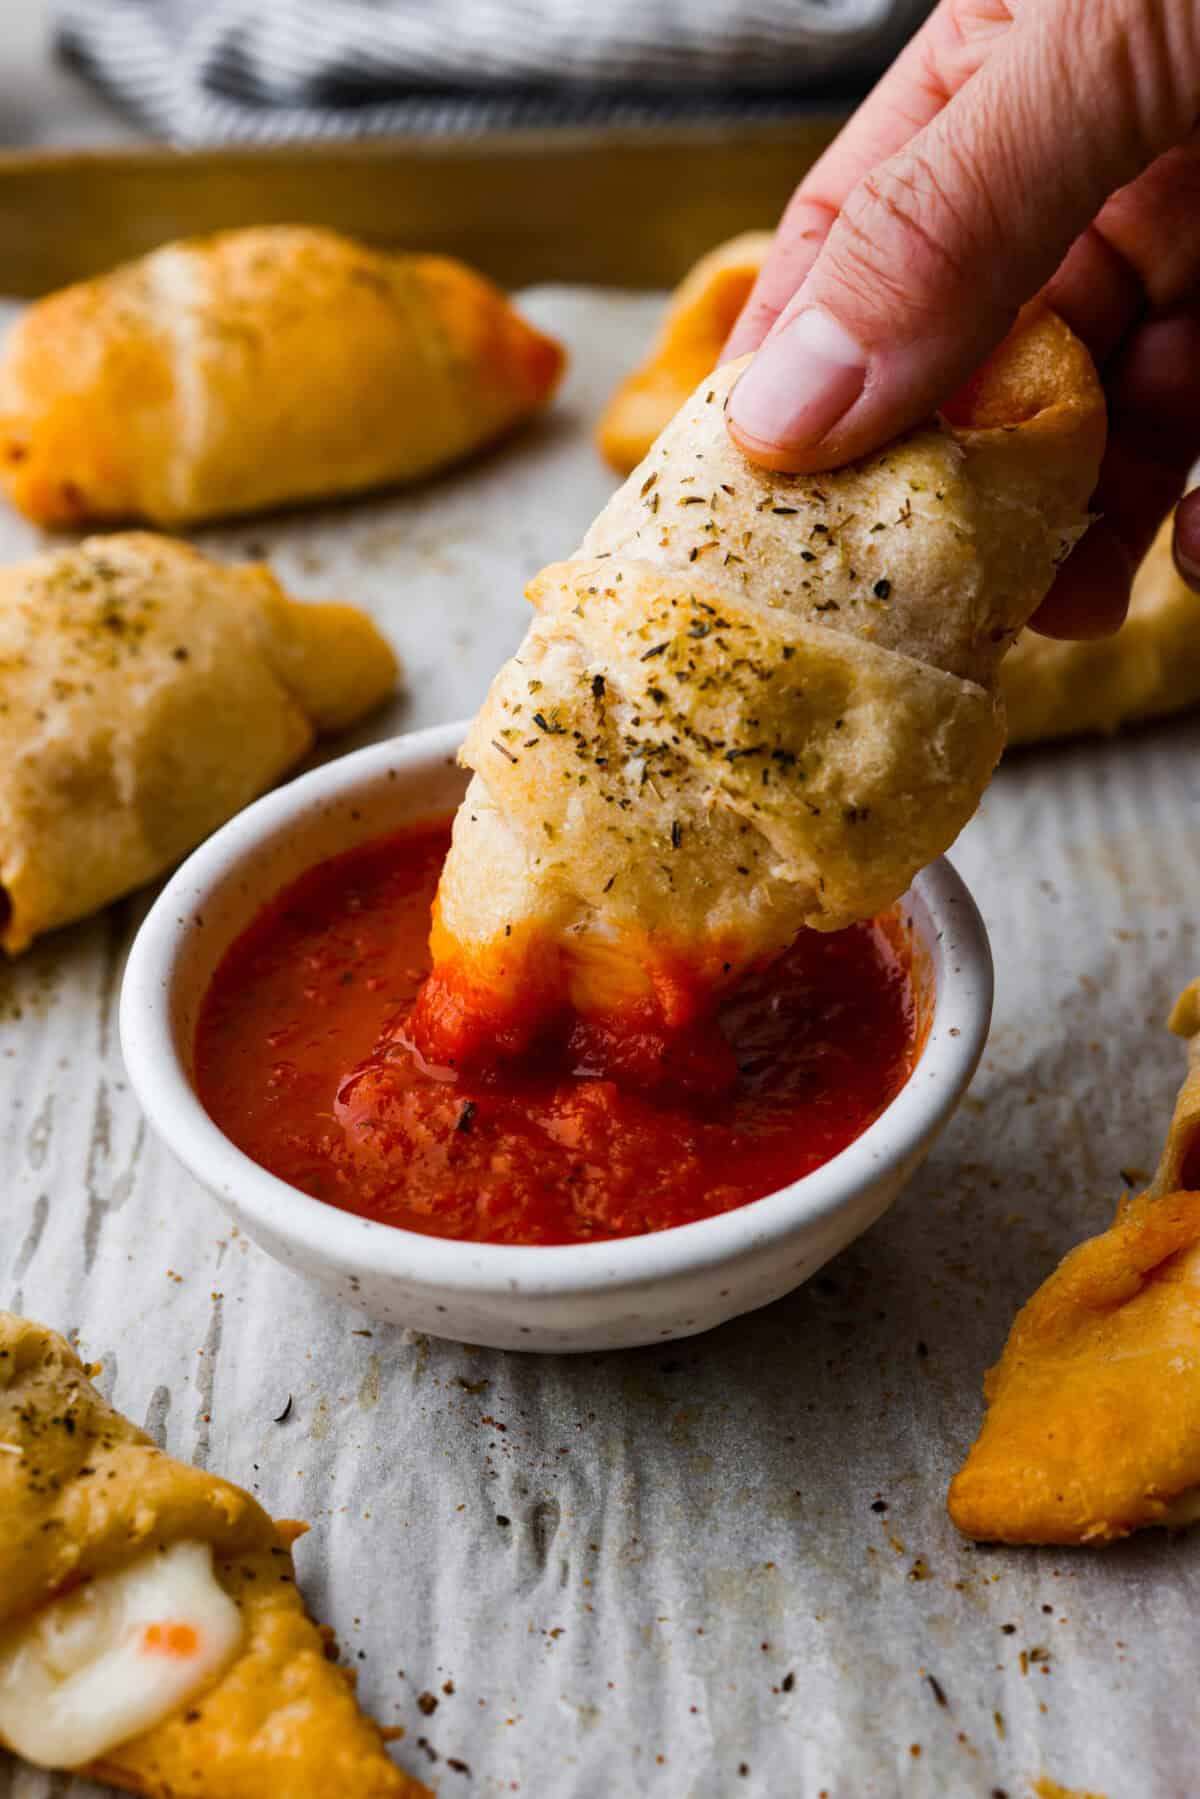 Angle shot of someone dipping a pizza roll into a small bowl of marinara sauce.